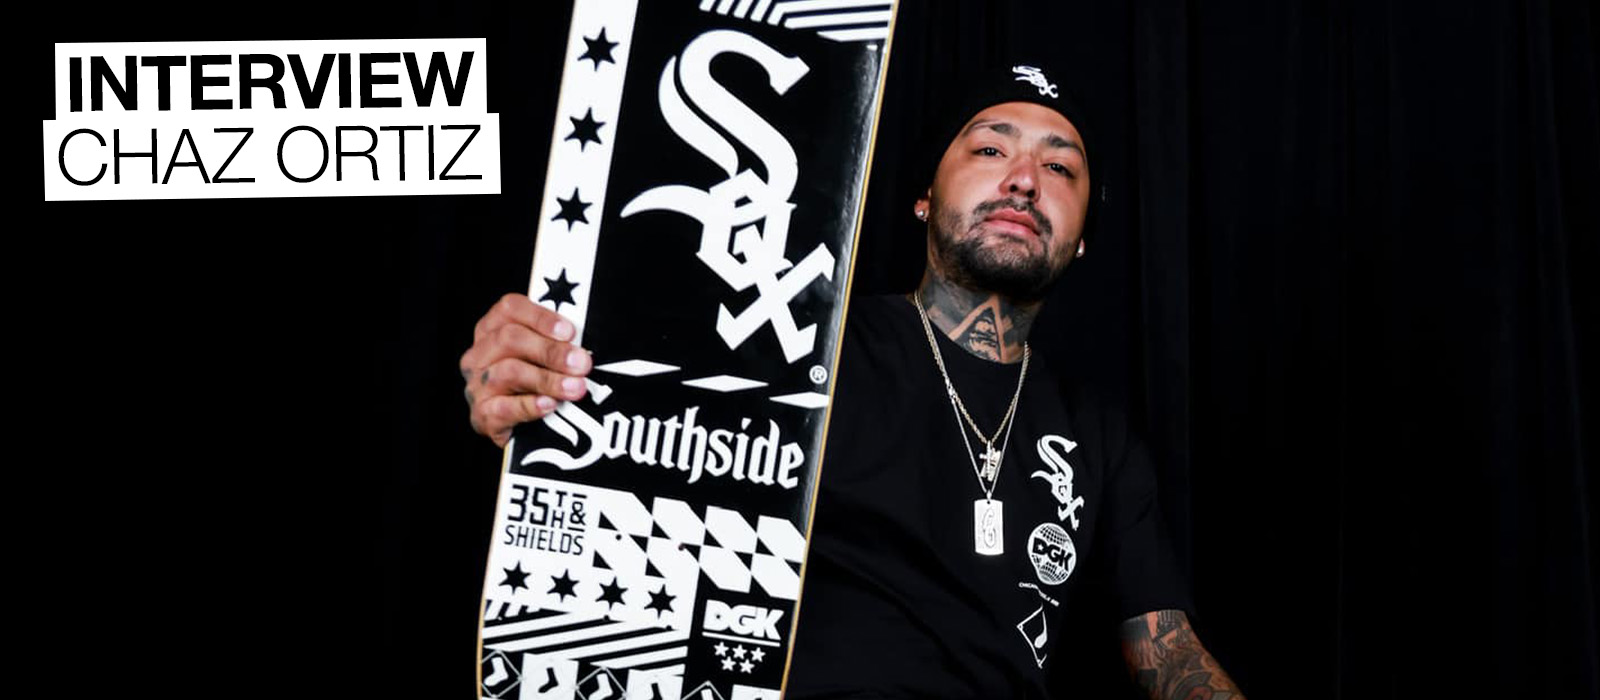 Home Good Day To Skateboards Interview with Chaz Ortiz Pro Skater for DGK Skateboards